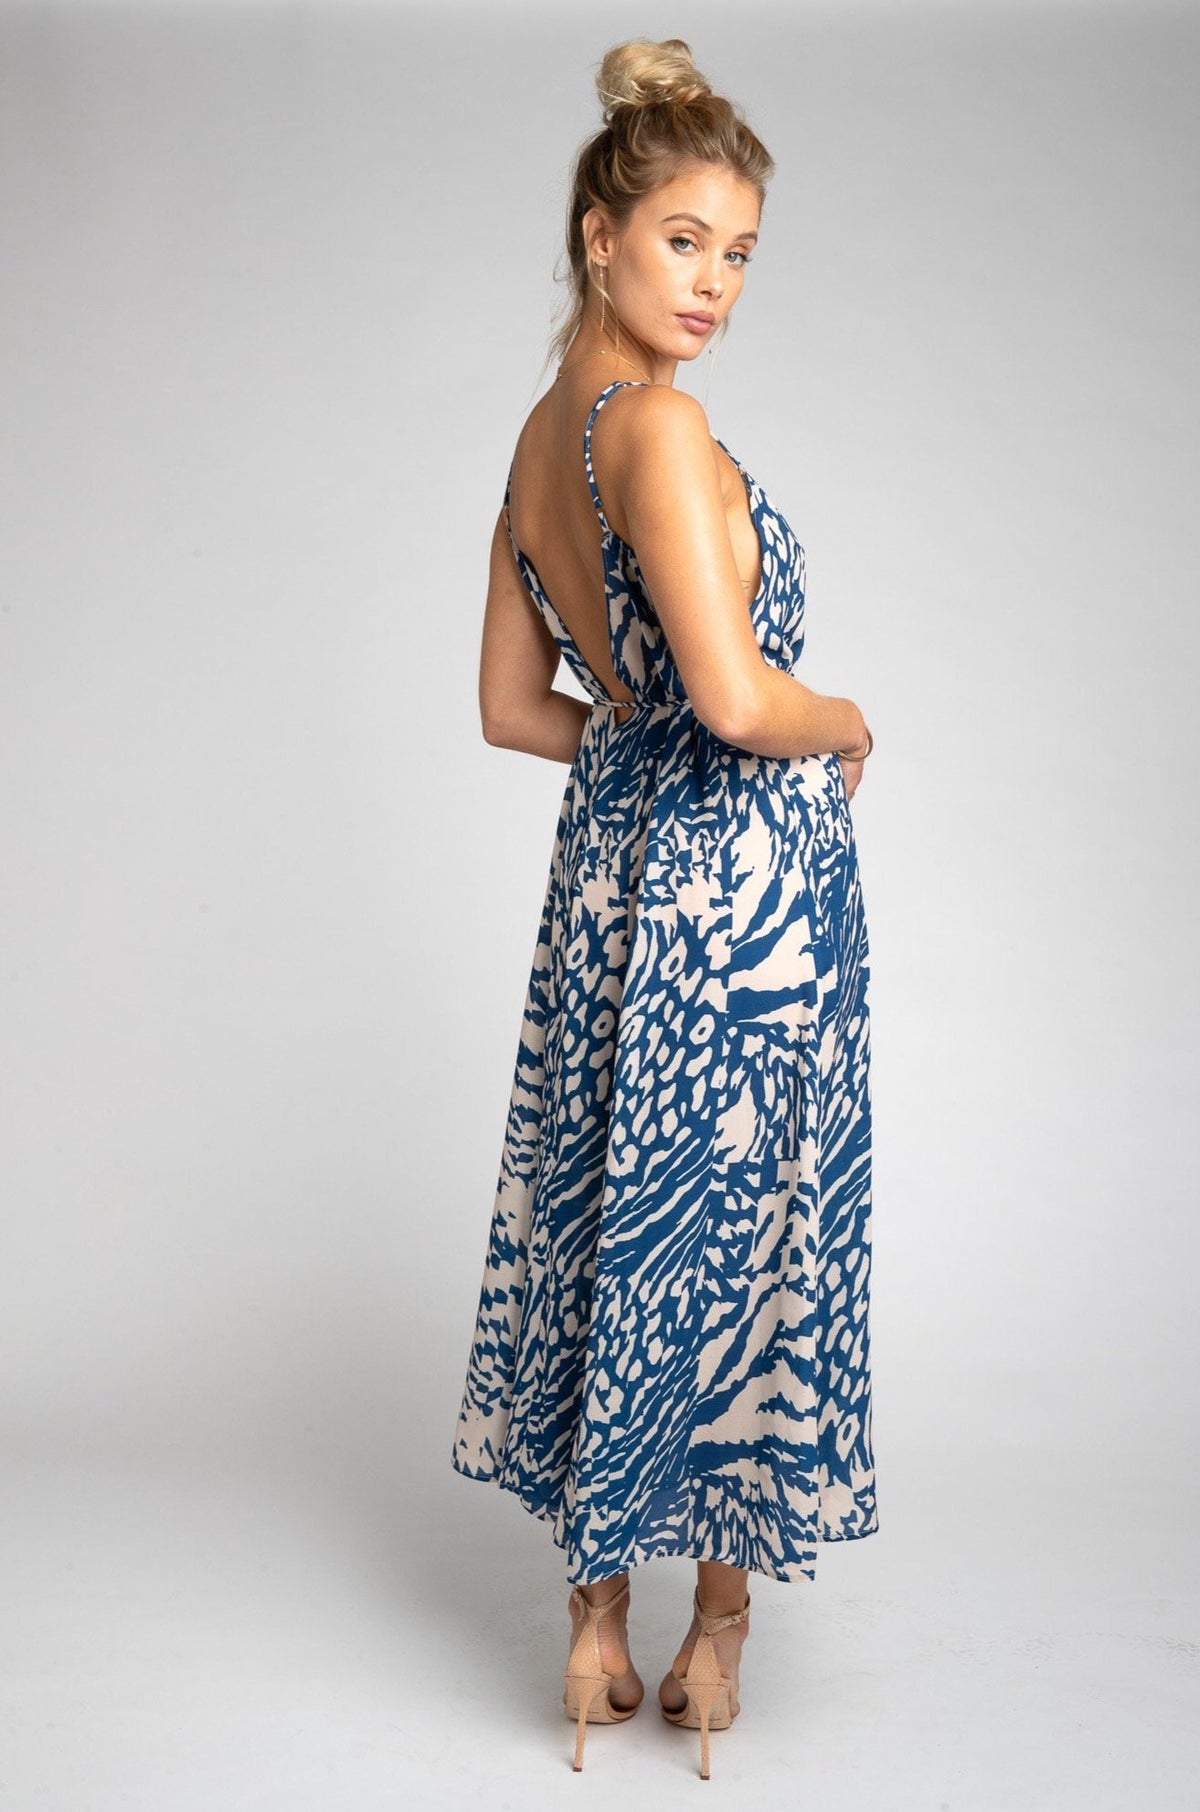 This is an image of Hannah Midi - RESA featuring a model wearing the dress